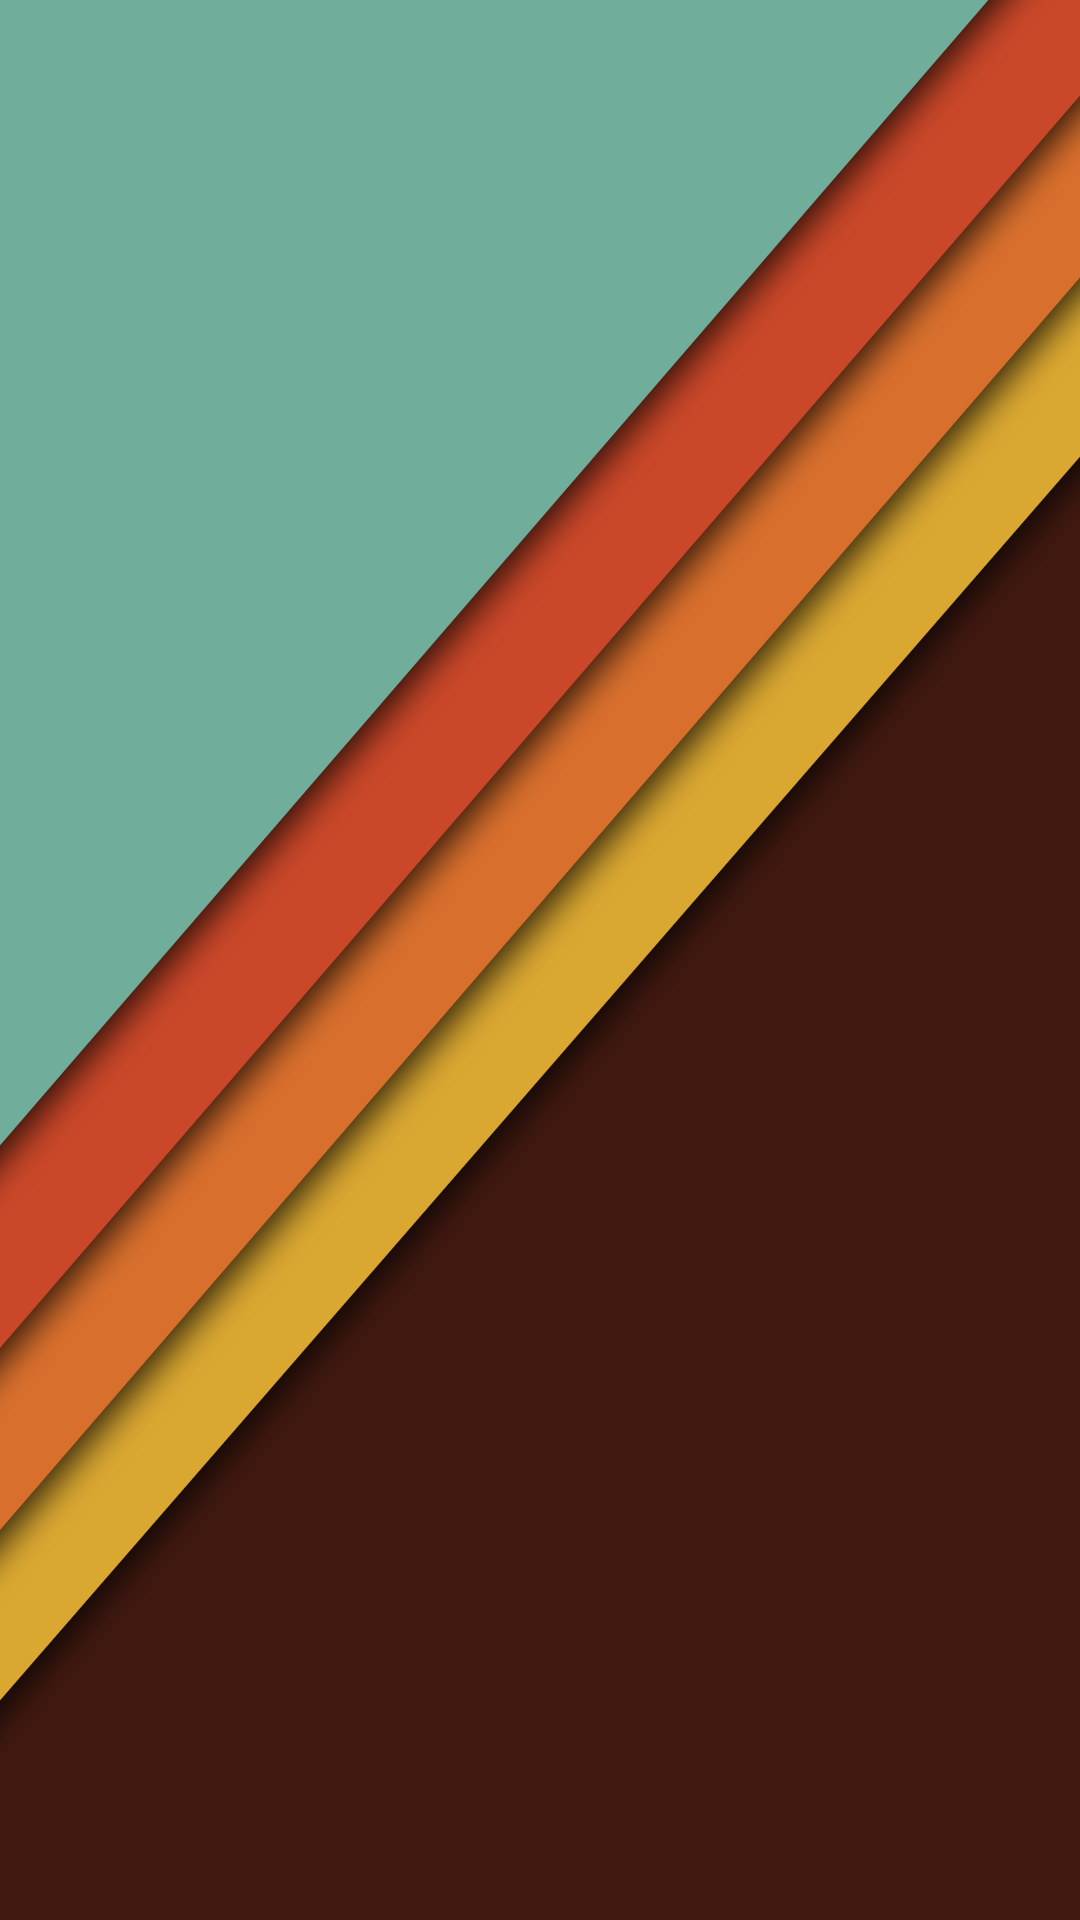 Android L Android Operating System 1976 Simple 1080x1920